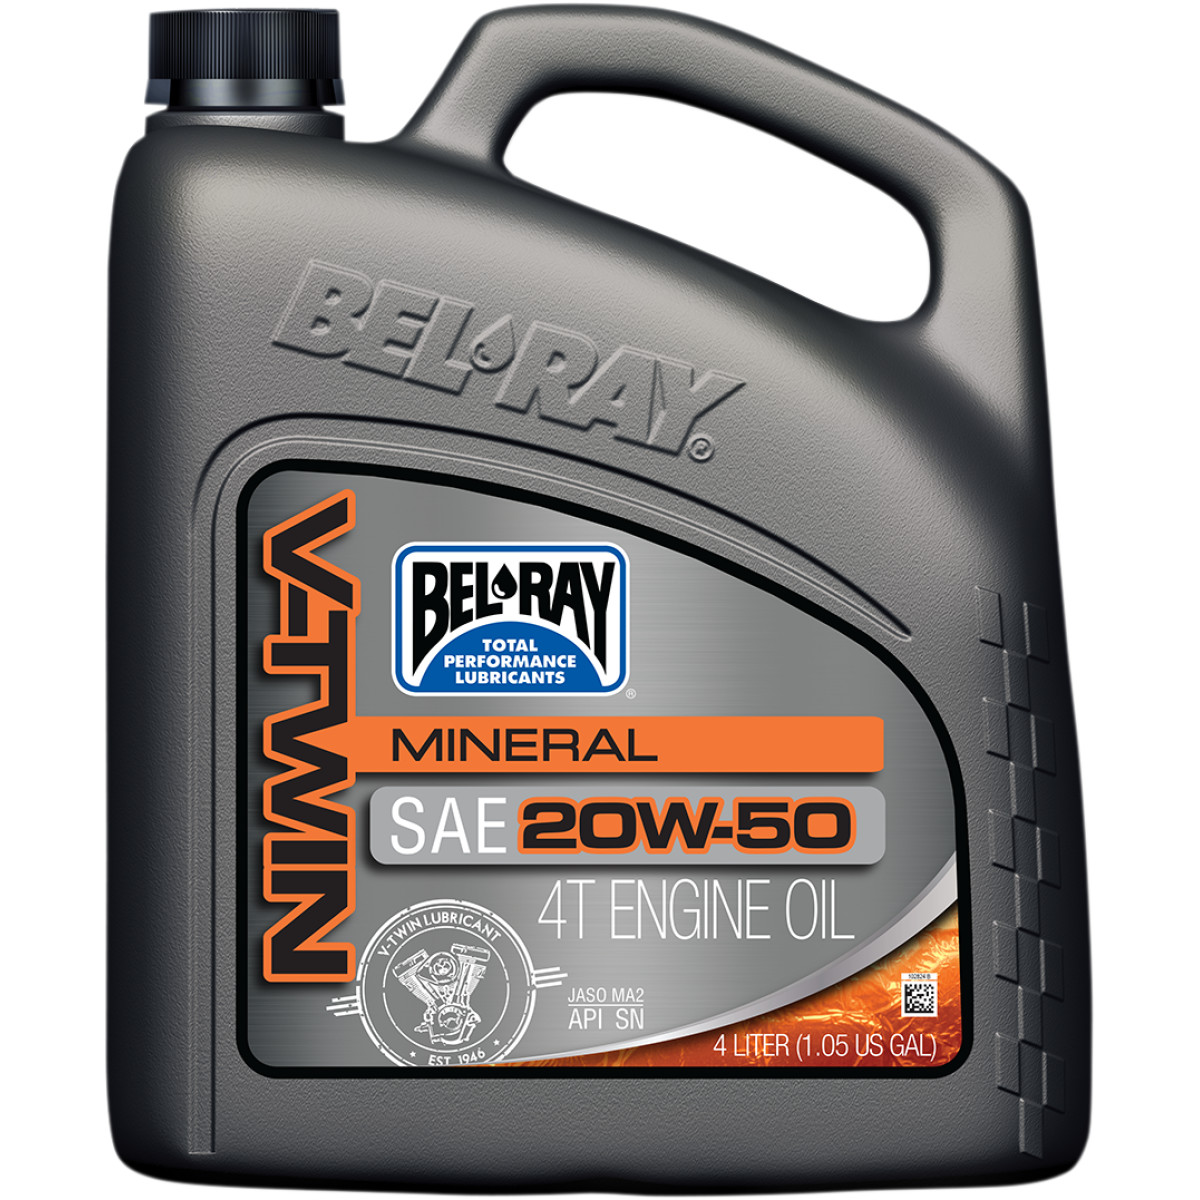 Bel-Ray V-Twin Engine Oil Mineral SAE 20W50, 4L